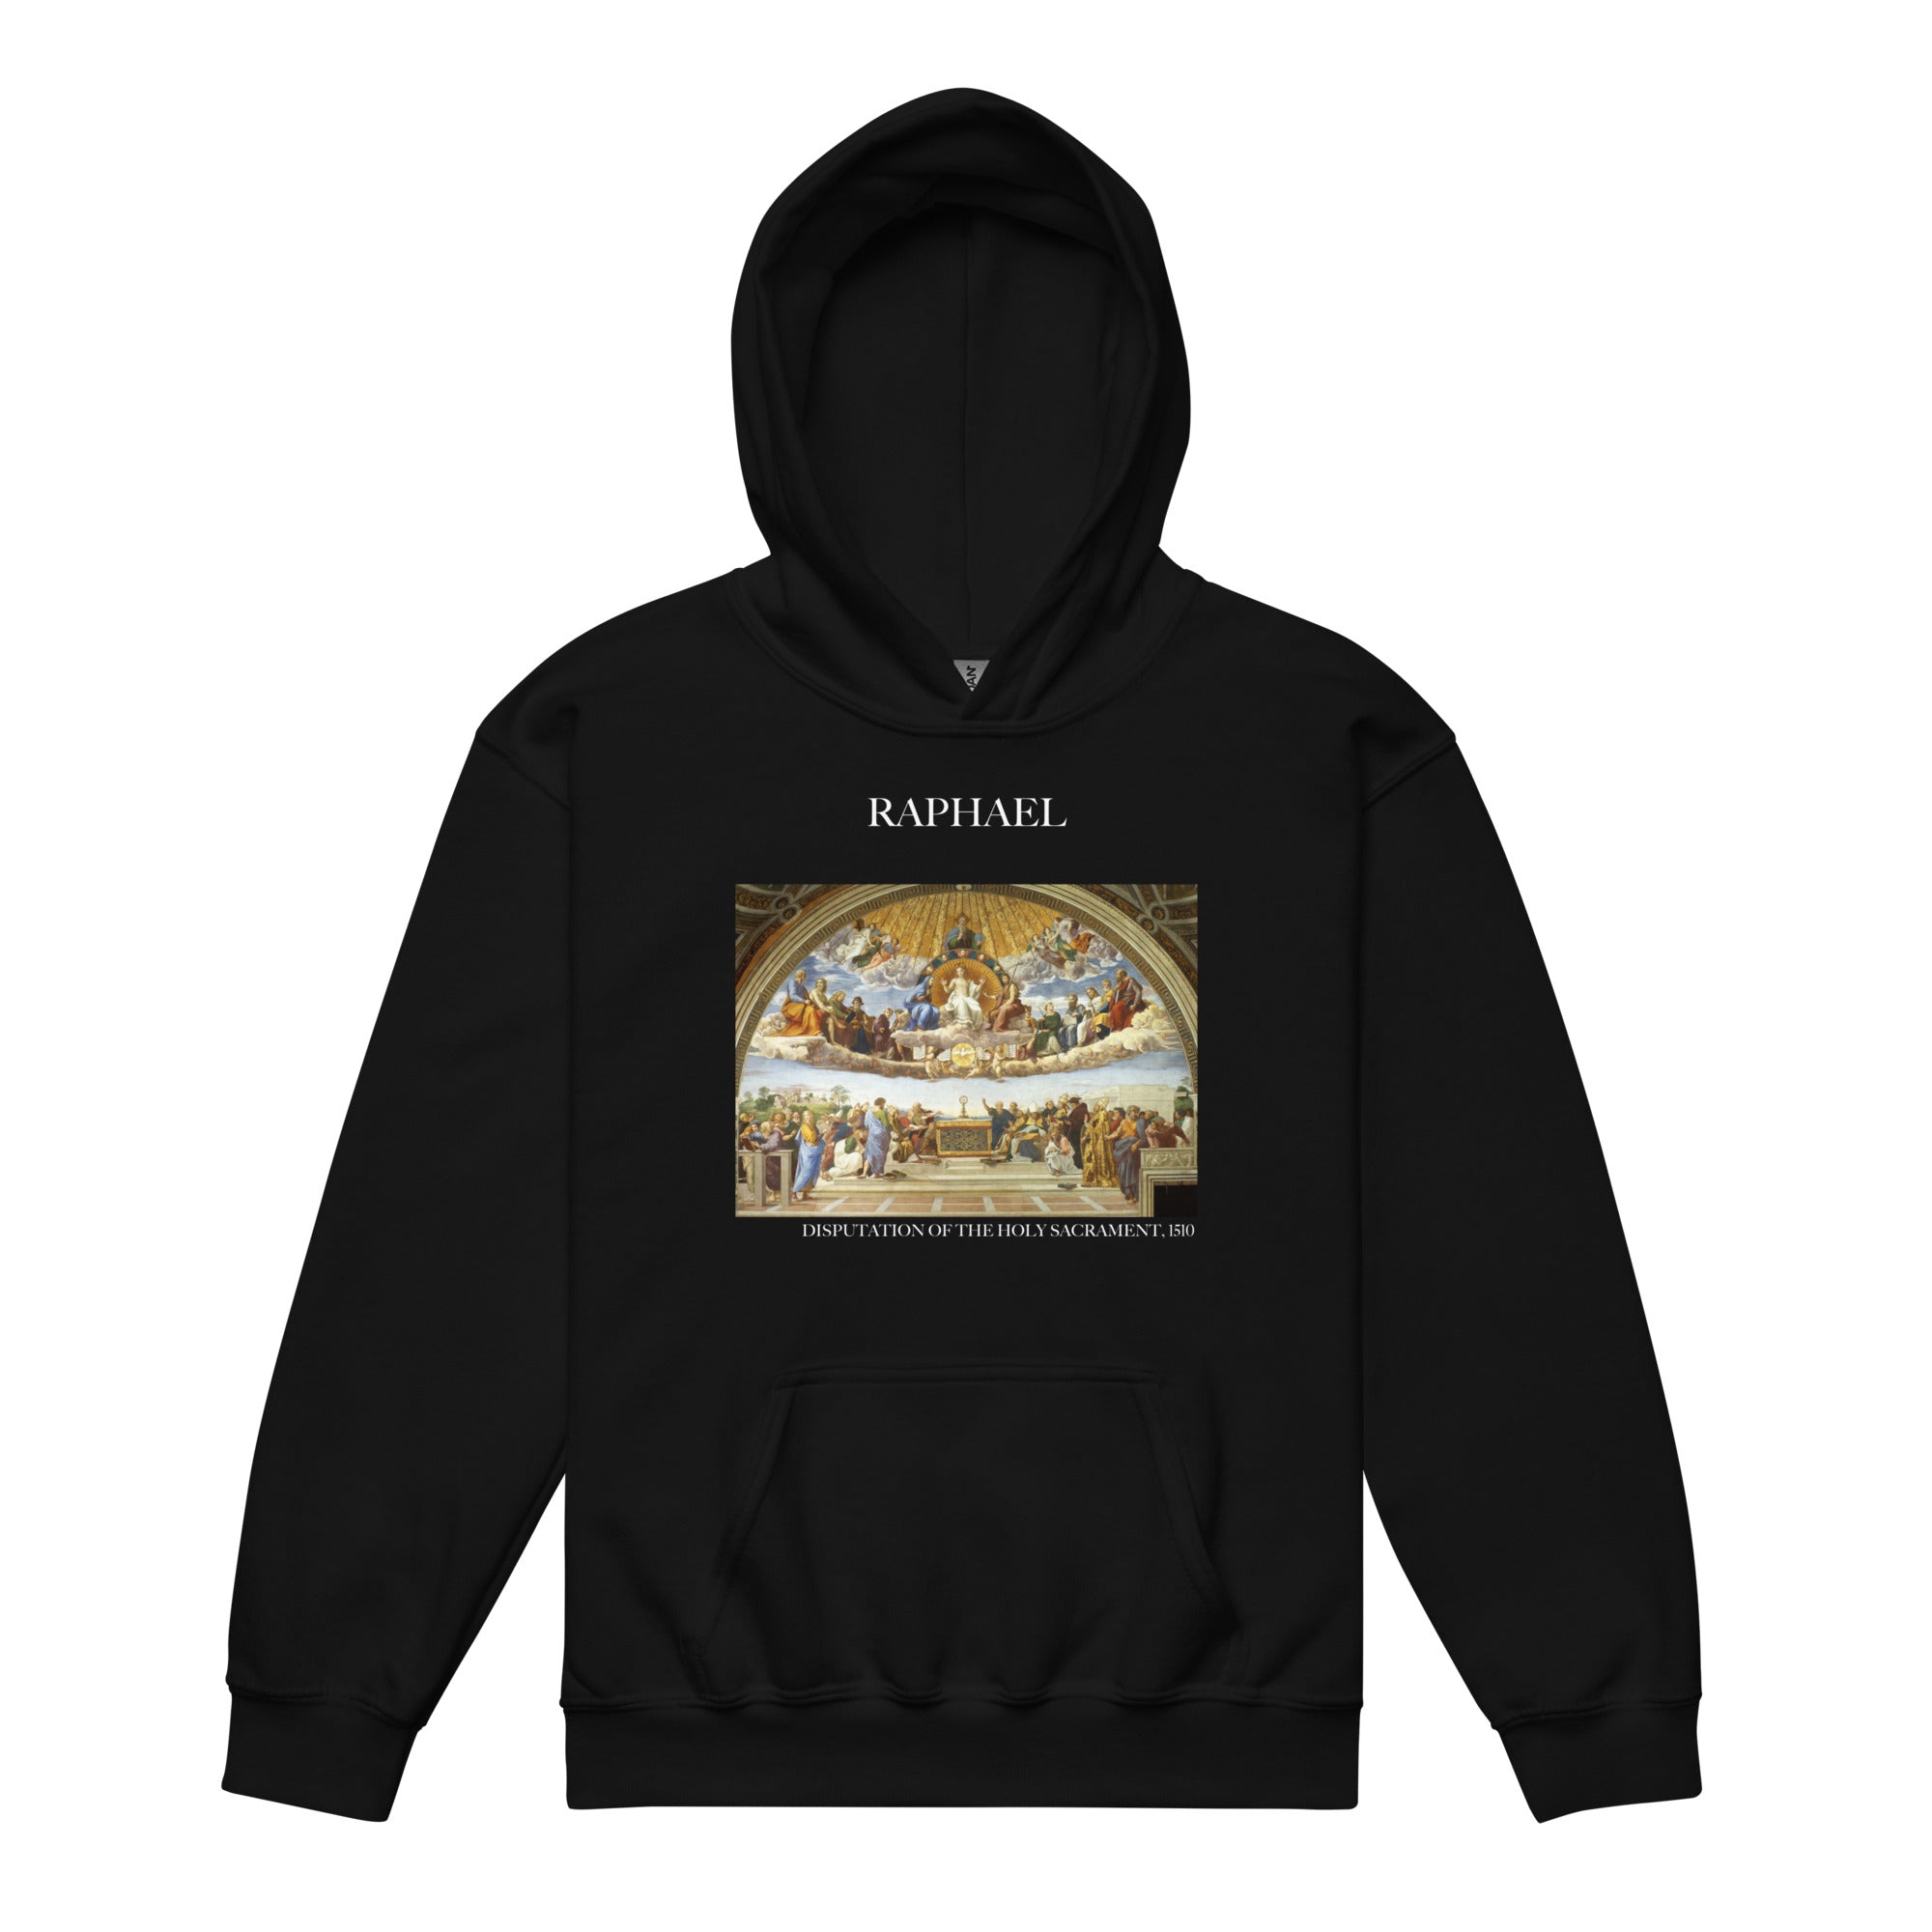 Raphael 'Disputation of the Holy Sacrament' Famous Painting Hoodie | Premium Youth Art Hoodie